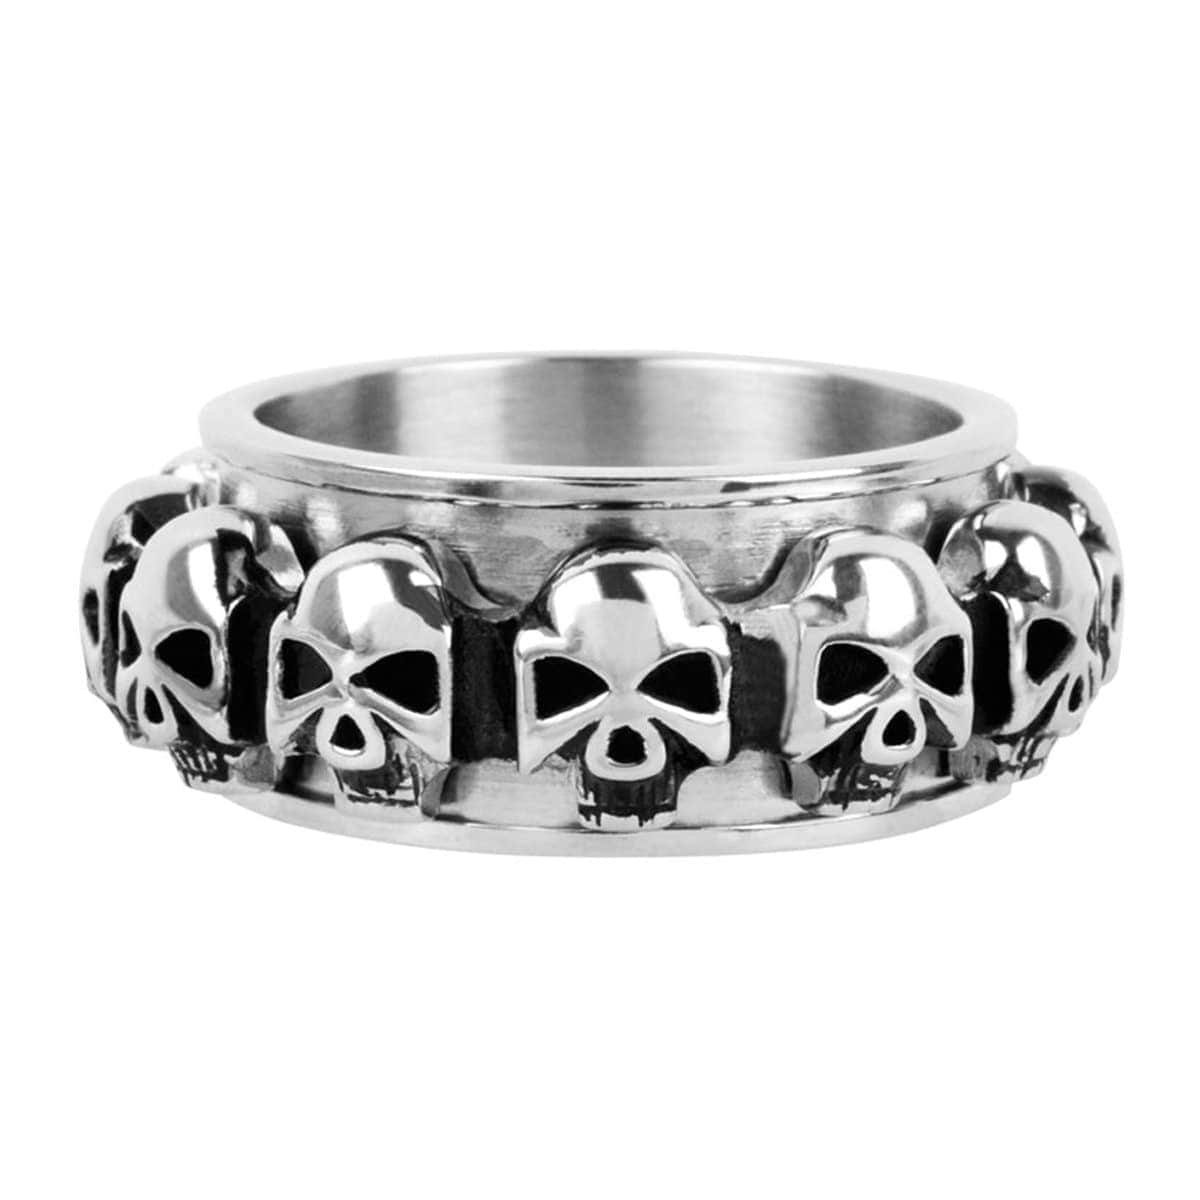 INOX JEWELRY Rings Silver Tone Stainless Steel All-Around Skull Spinner Ring